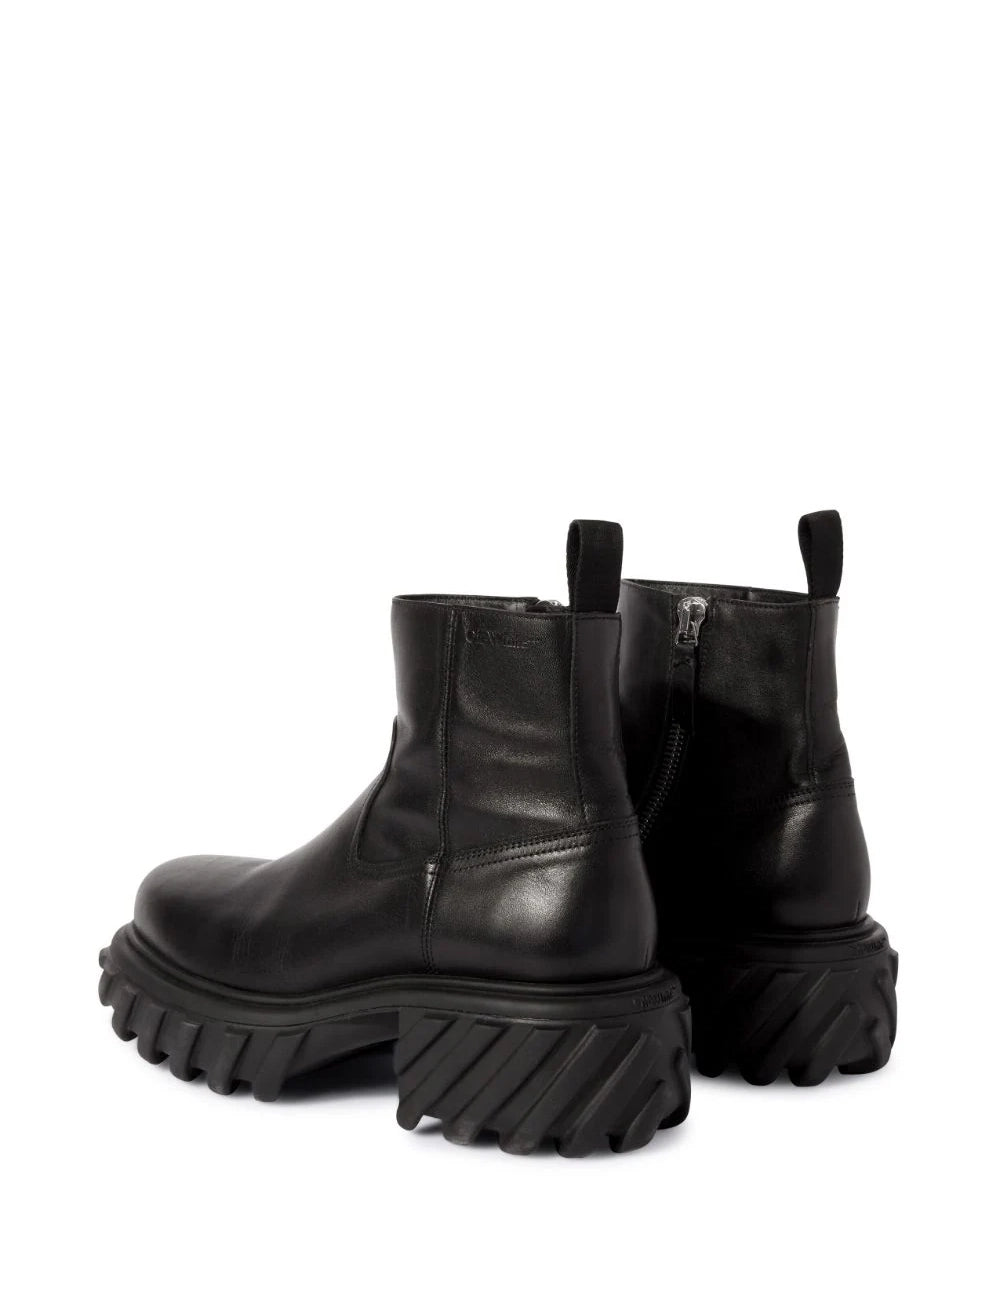 OFF WHITE EXPLORATION MOTOR ANKLE BOOT